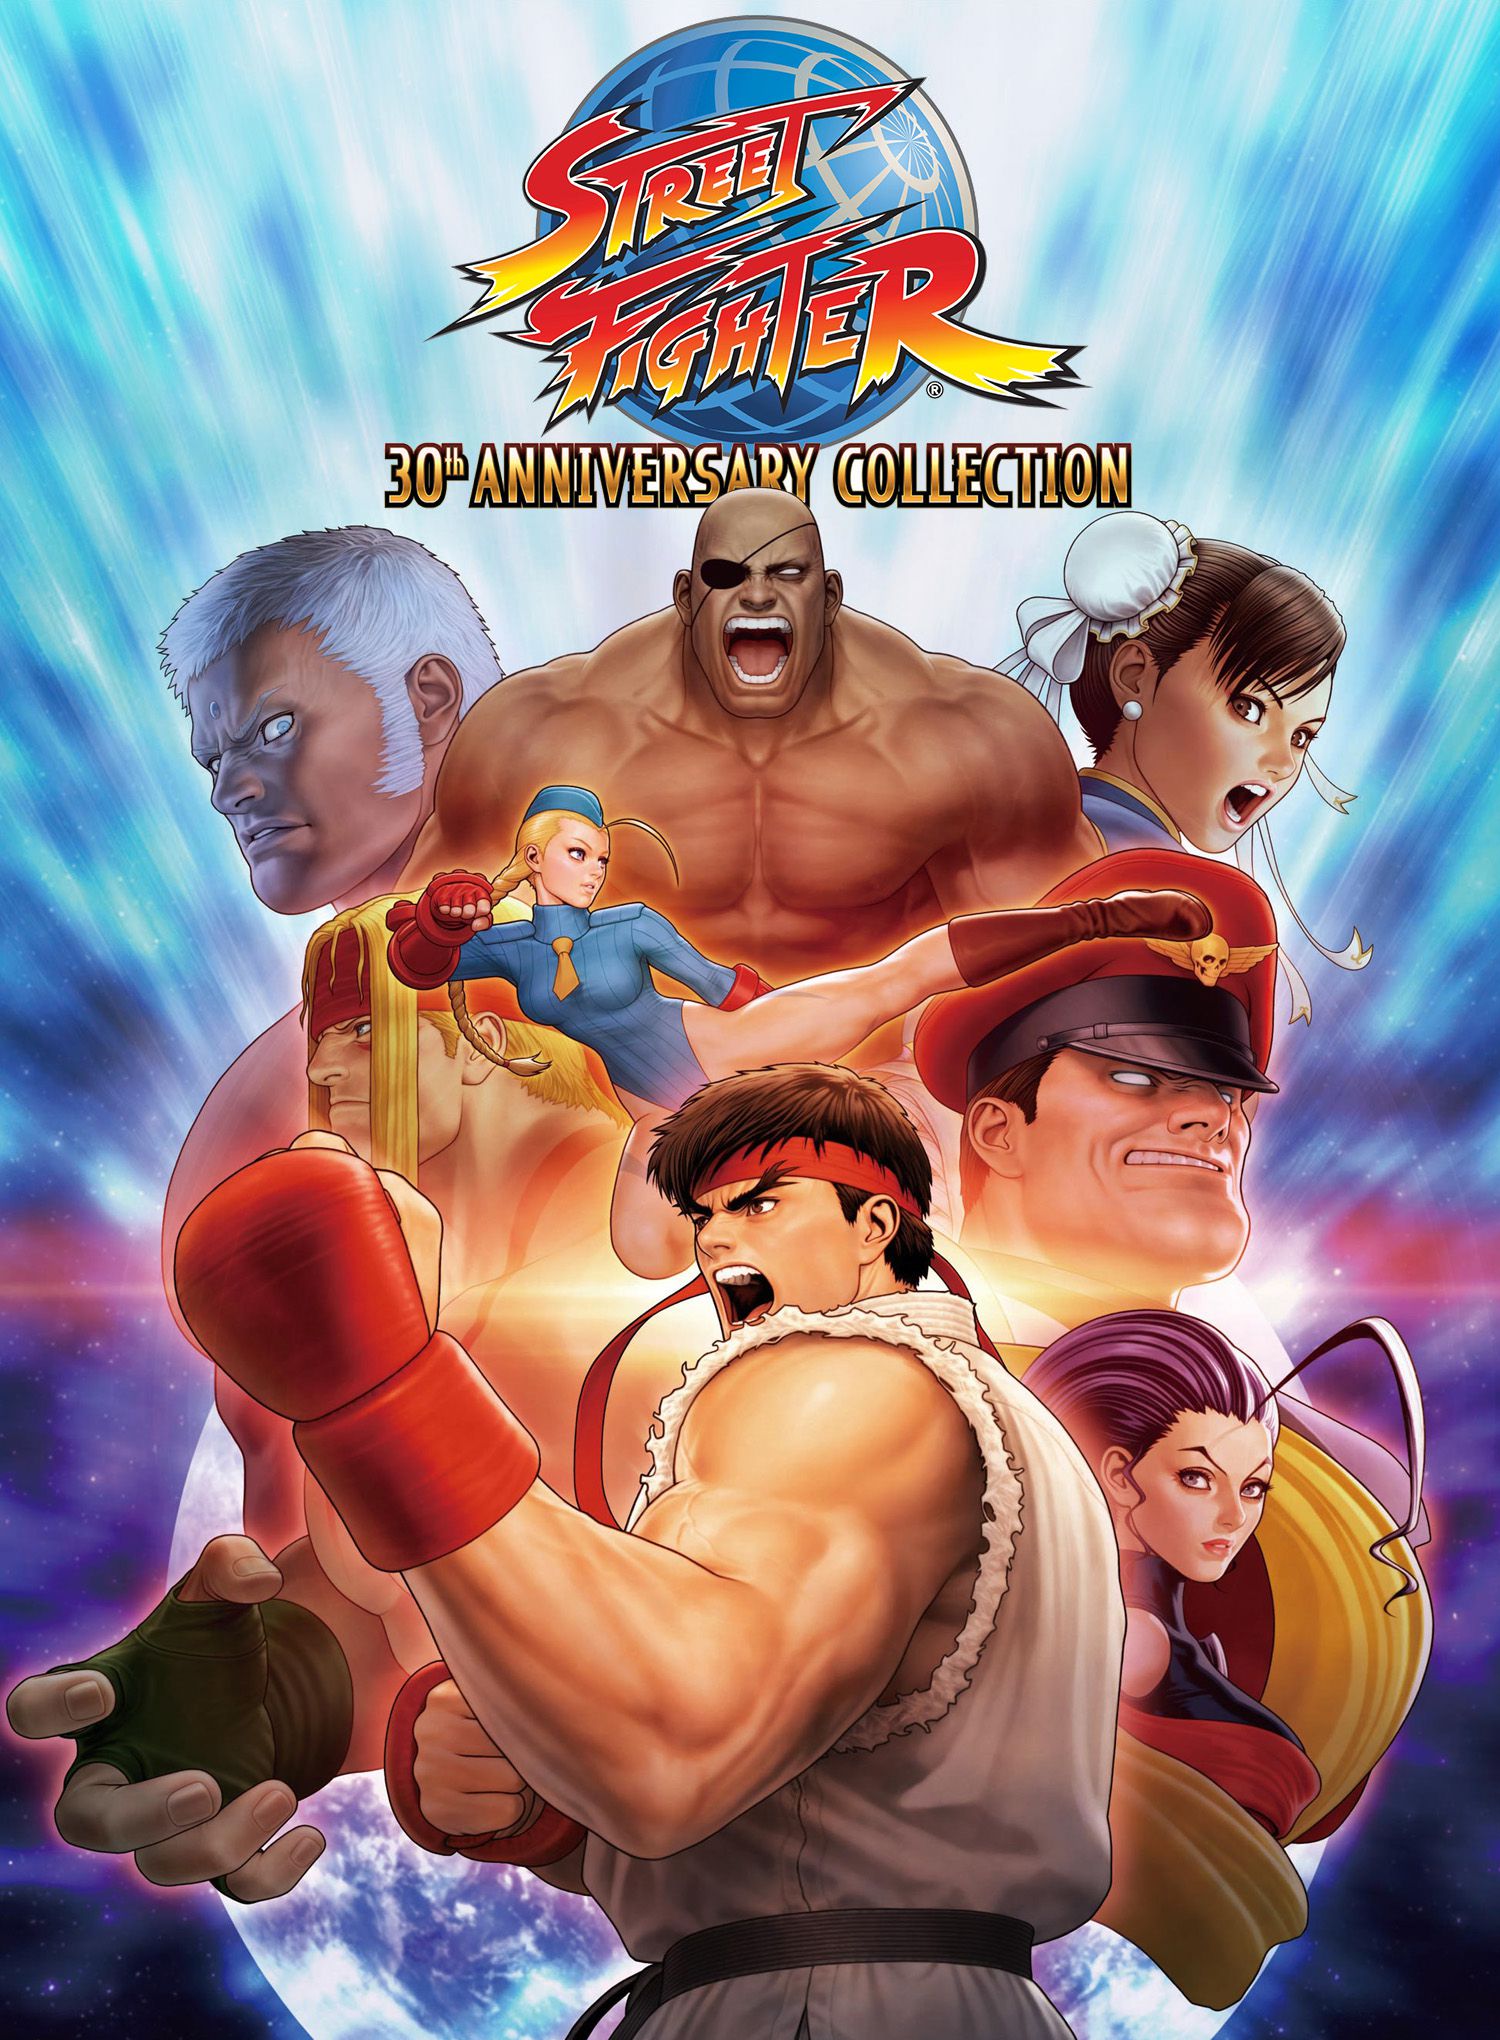 Street Fighter 30th Anniversary Collection (2018)  - Jeu vidéo streaming VF gratuit complet